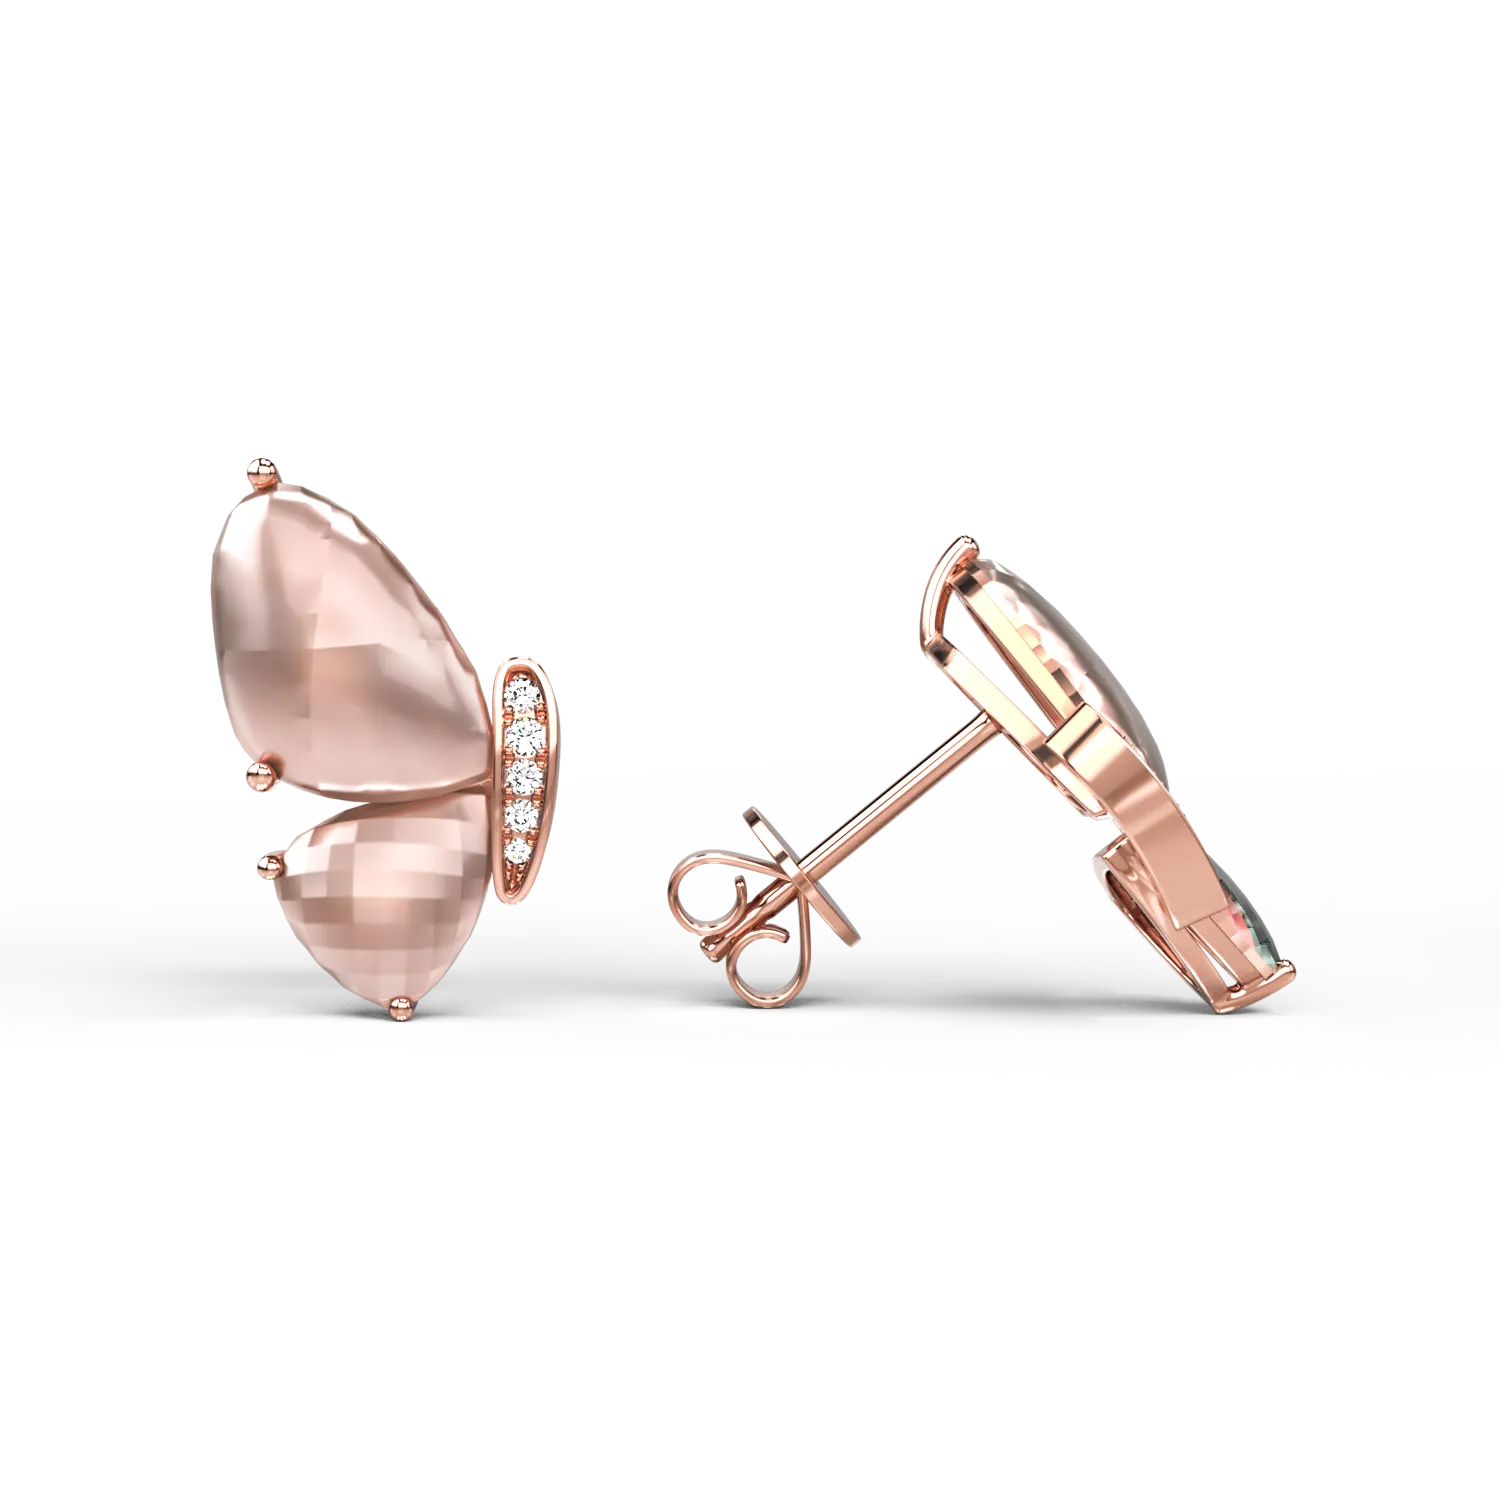 18K rose gold butterfly earrings with rose quartz of 8.2ct and diamonds of 0.06ct